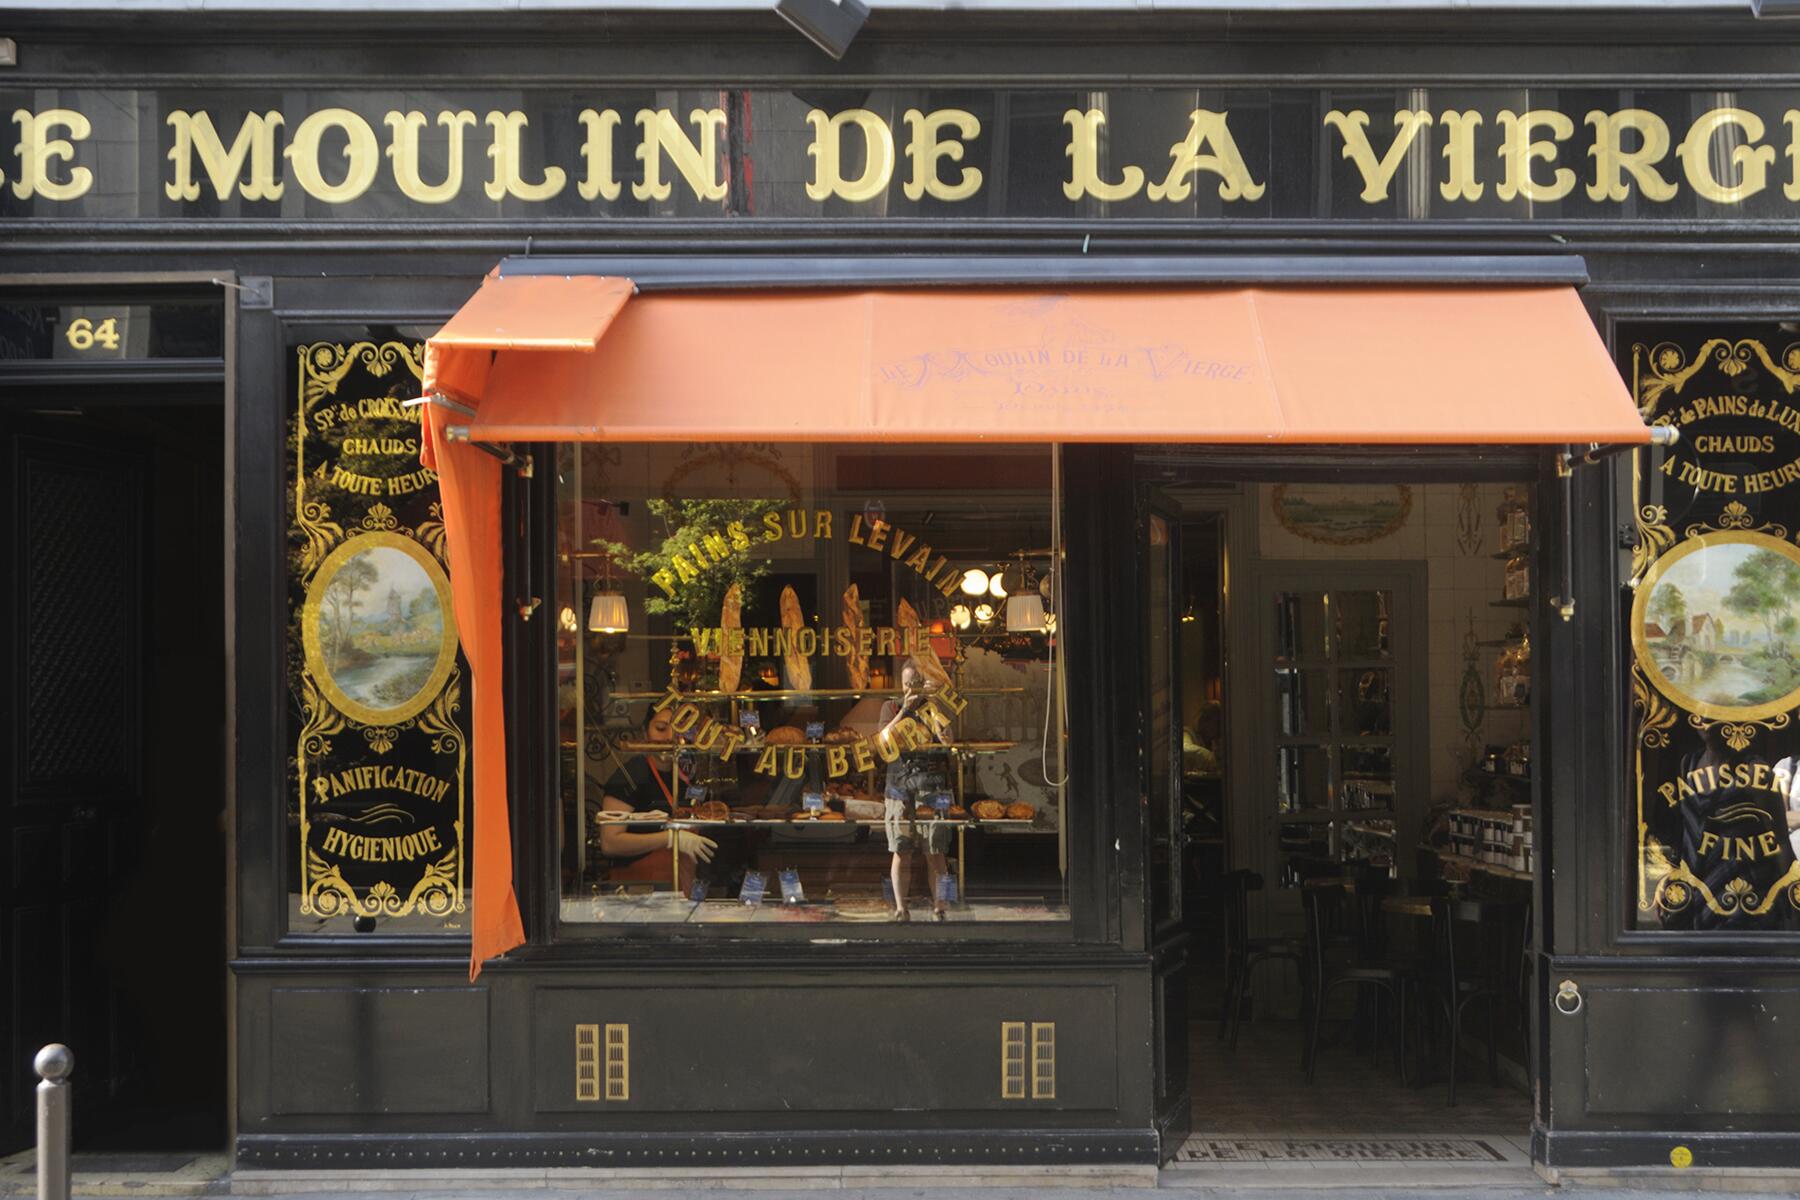 <a href='https://www.fodors.com/world/europe/france/paris/experiences/news/photos/the-best-bakeries-and-boulangeries-in-paris#'>From &quot;The 13 Best Bakeries and Boulangeries in Paris: Le Moulin de la Vierge&quot;</a>